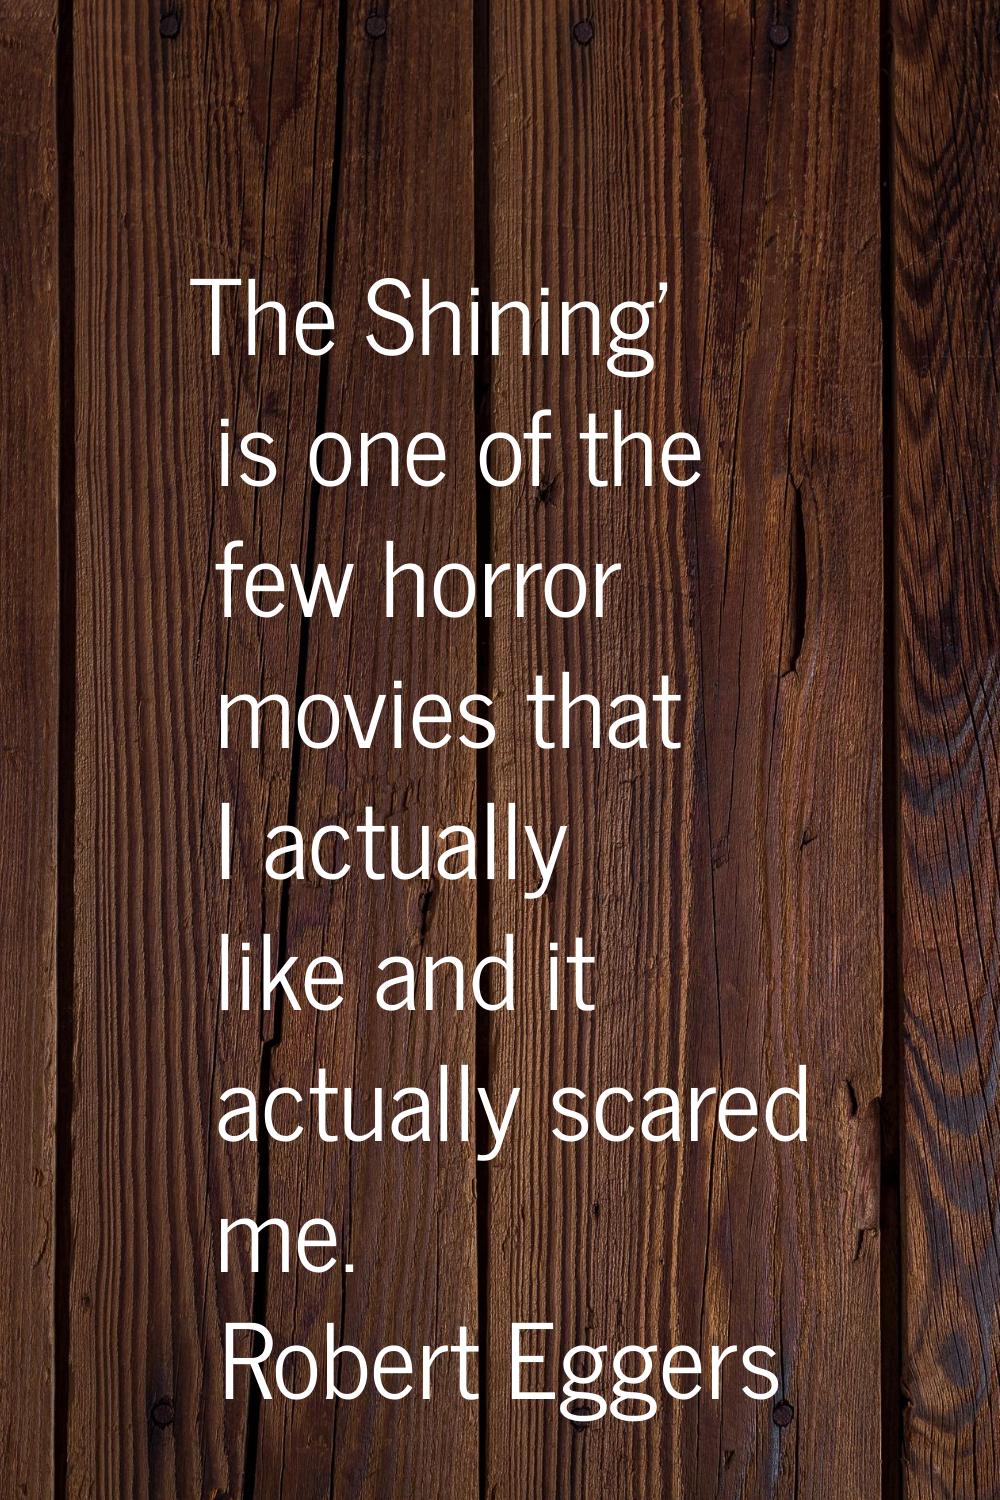 The Shining' is one of the few horror movies that I actually like and it actually scared me.